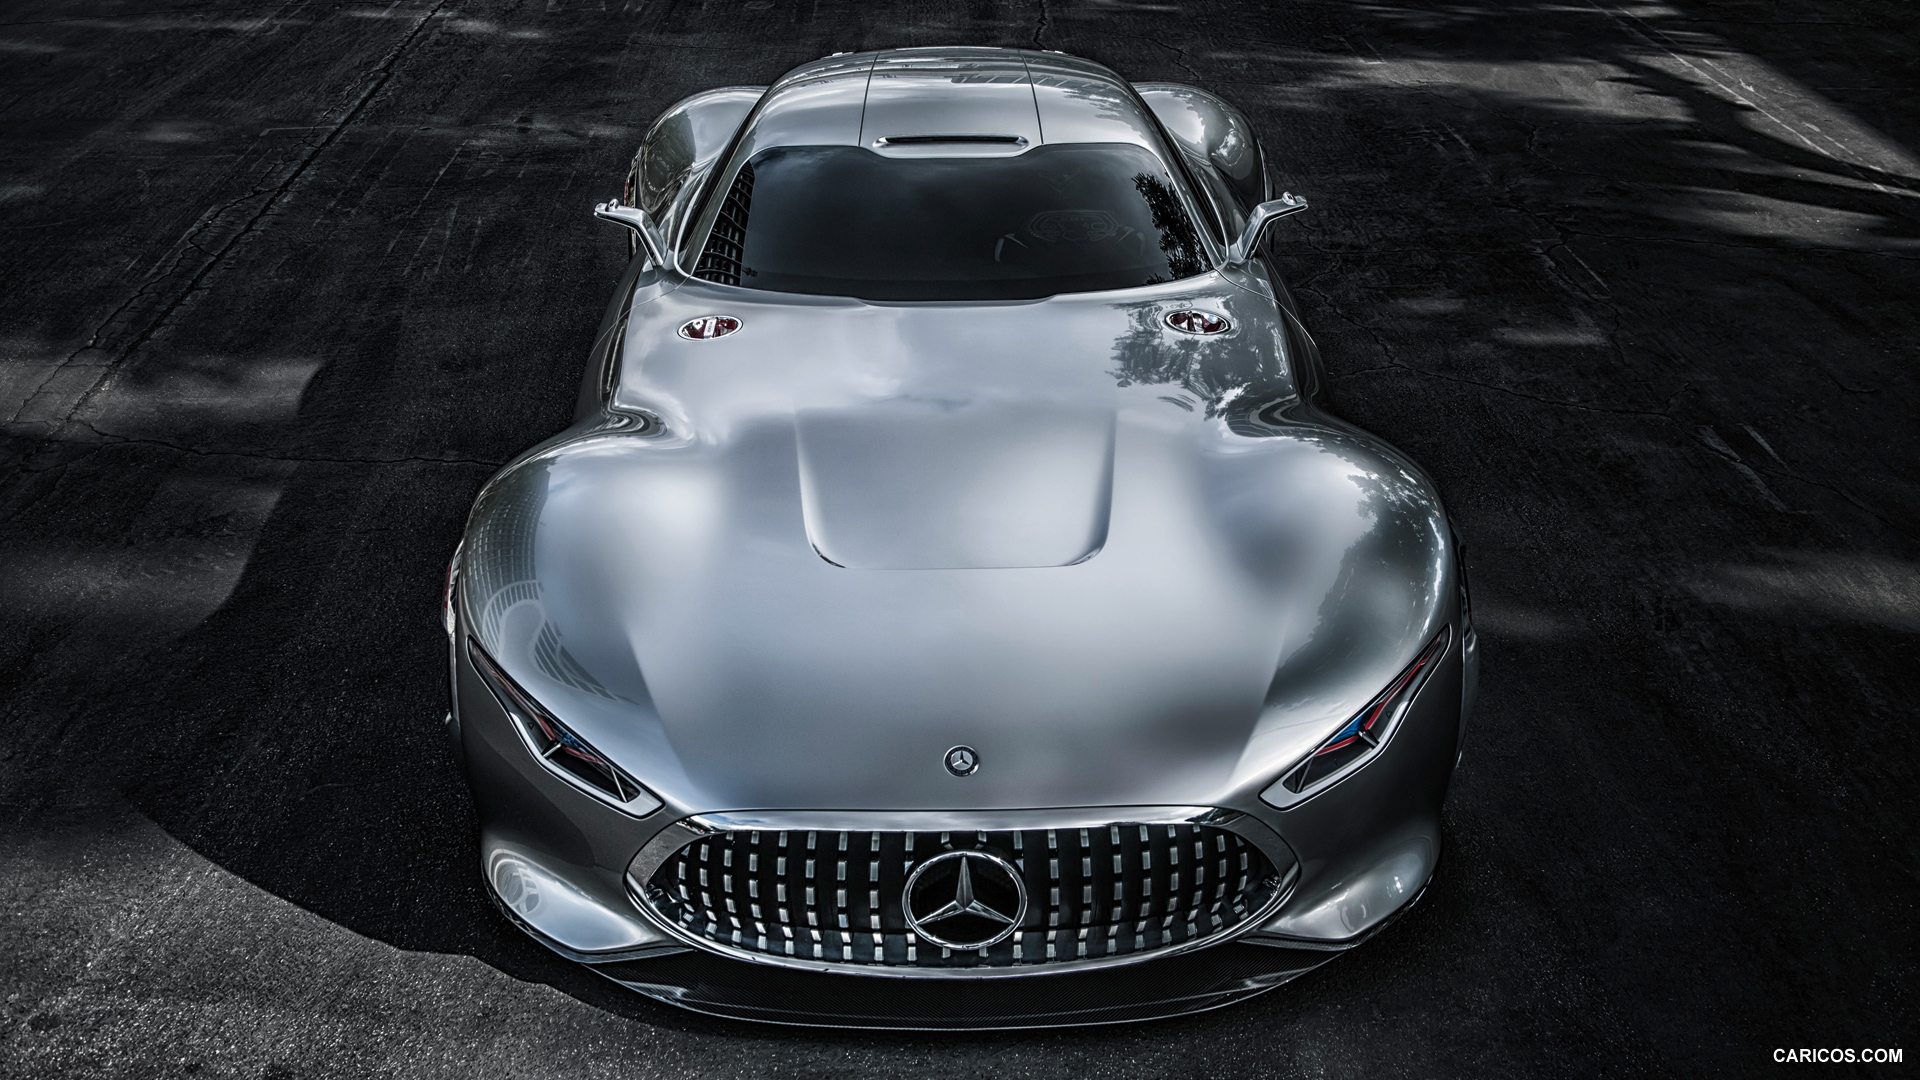 Mercedes-Benz AMG Vision Gran Turismo Concept (2013)  - Front, #15 of 25